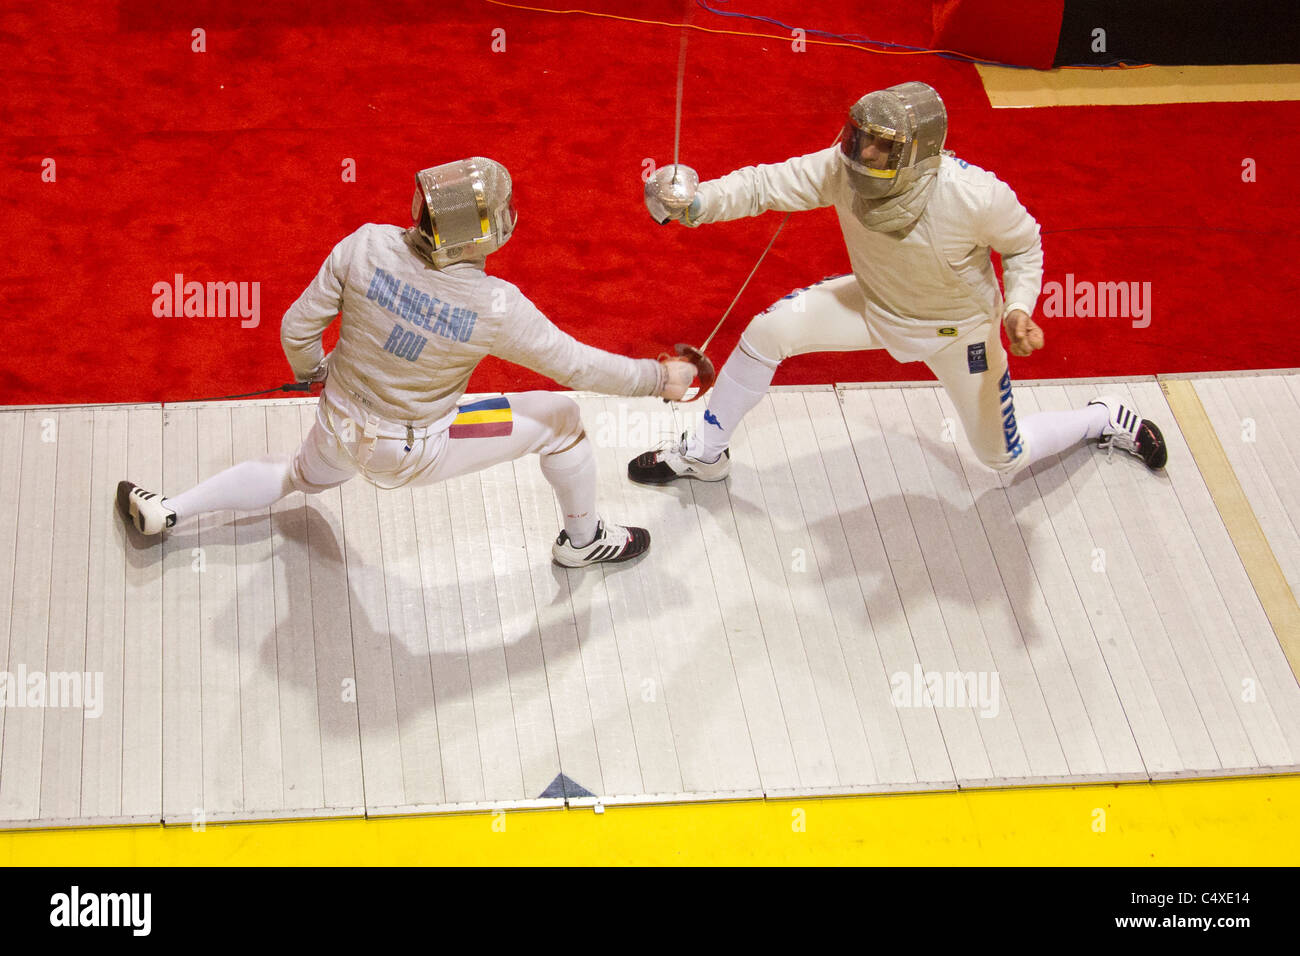 Tibbberiu Dolniceanu (ROU) competing against Giampiero Pastore (ITA) at the 2011 New York Saber World Cup. Stock Photo